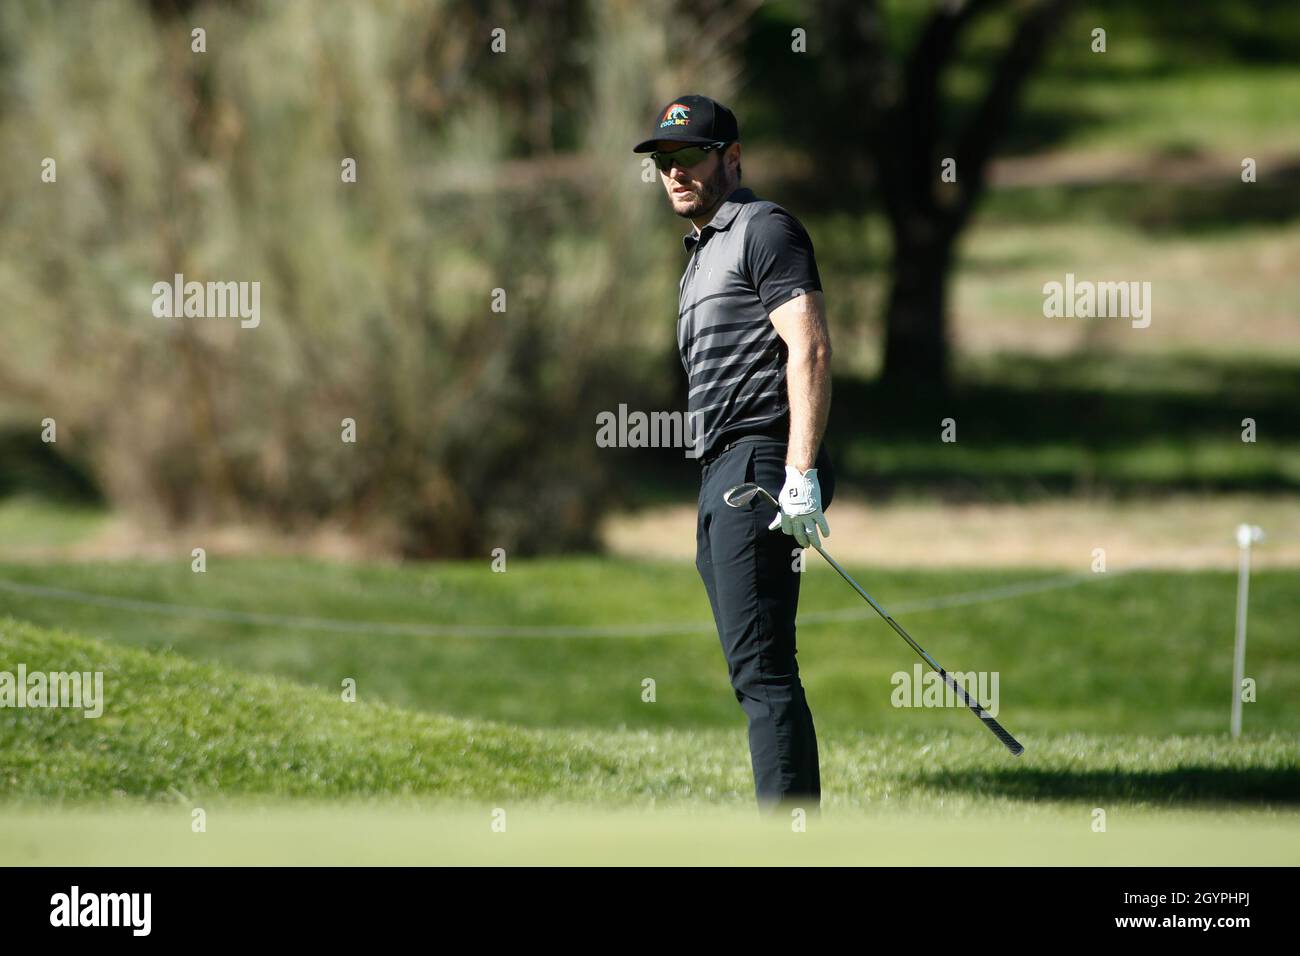 Madrid, Spain. 08th Oct, 2021. Kalle Samooja of Finland during the 2021 Acciona Open de Espana, Golf European Tour, Spain Open, on October 8, 2021 at Casa de Campo in Madrid, Spain - Photo: Oscar Barroso/DPPI/LiveMedia Credit: Independent Photo Agency/Alamy Live News Stock Photo